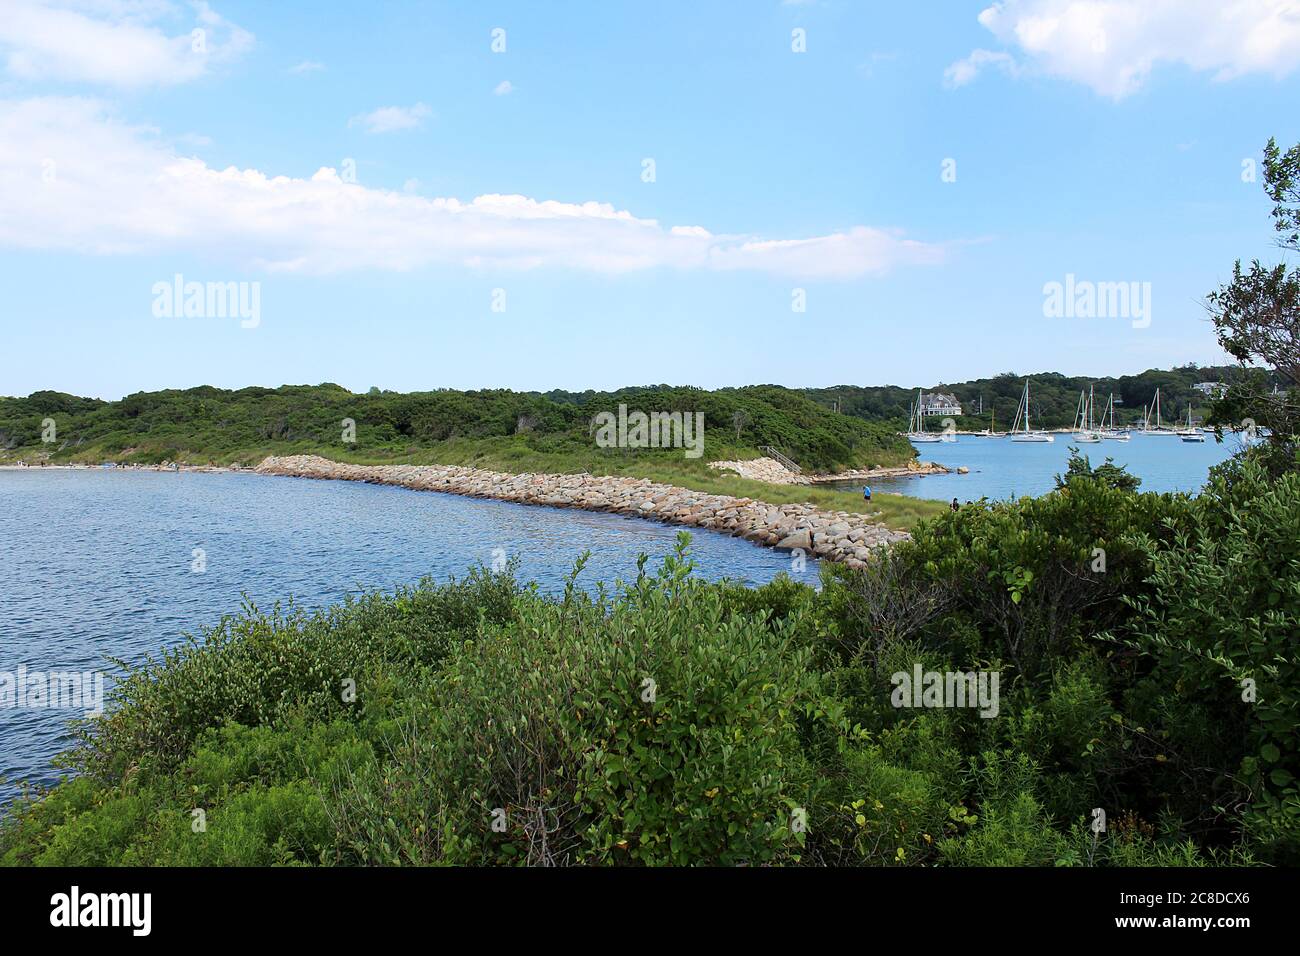 The Knob lookout at Quissett Harbor Road, Woods Hole in the Falmouth area of Cape Cod. Scenic hiking trail with beaches, wooded area and wildlife. Stock Photo